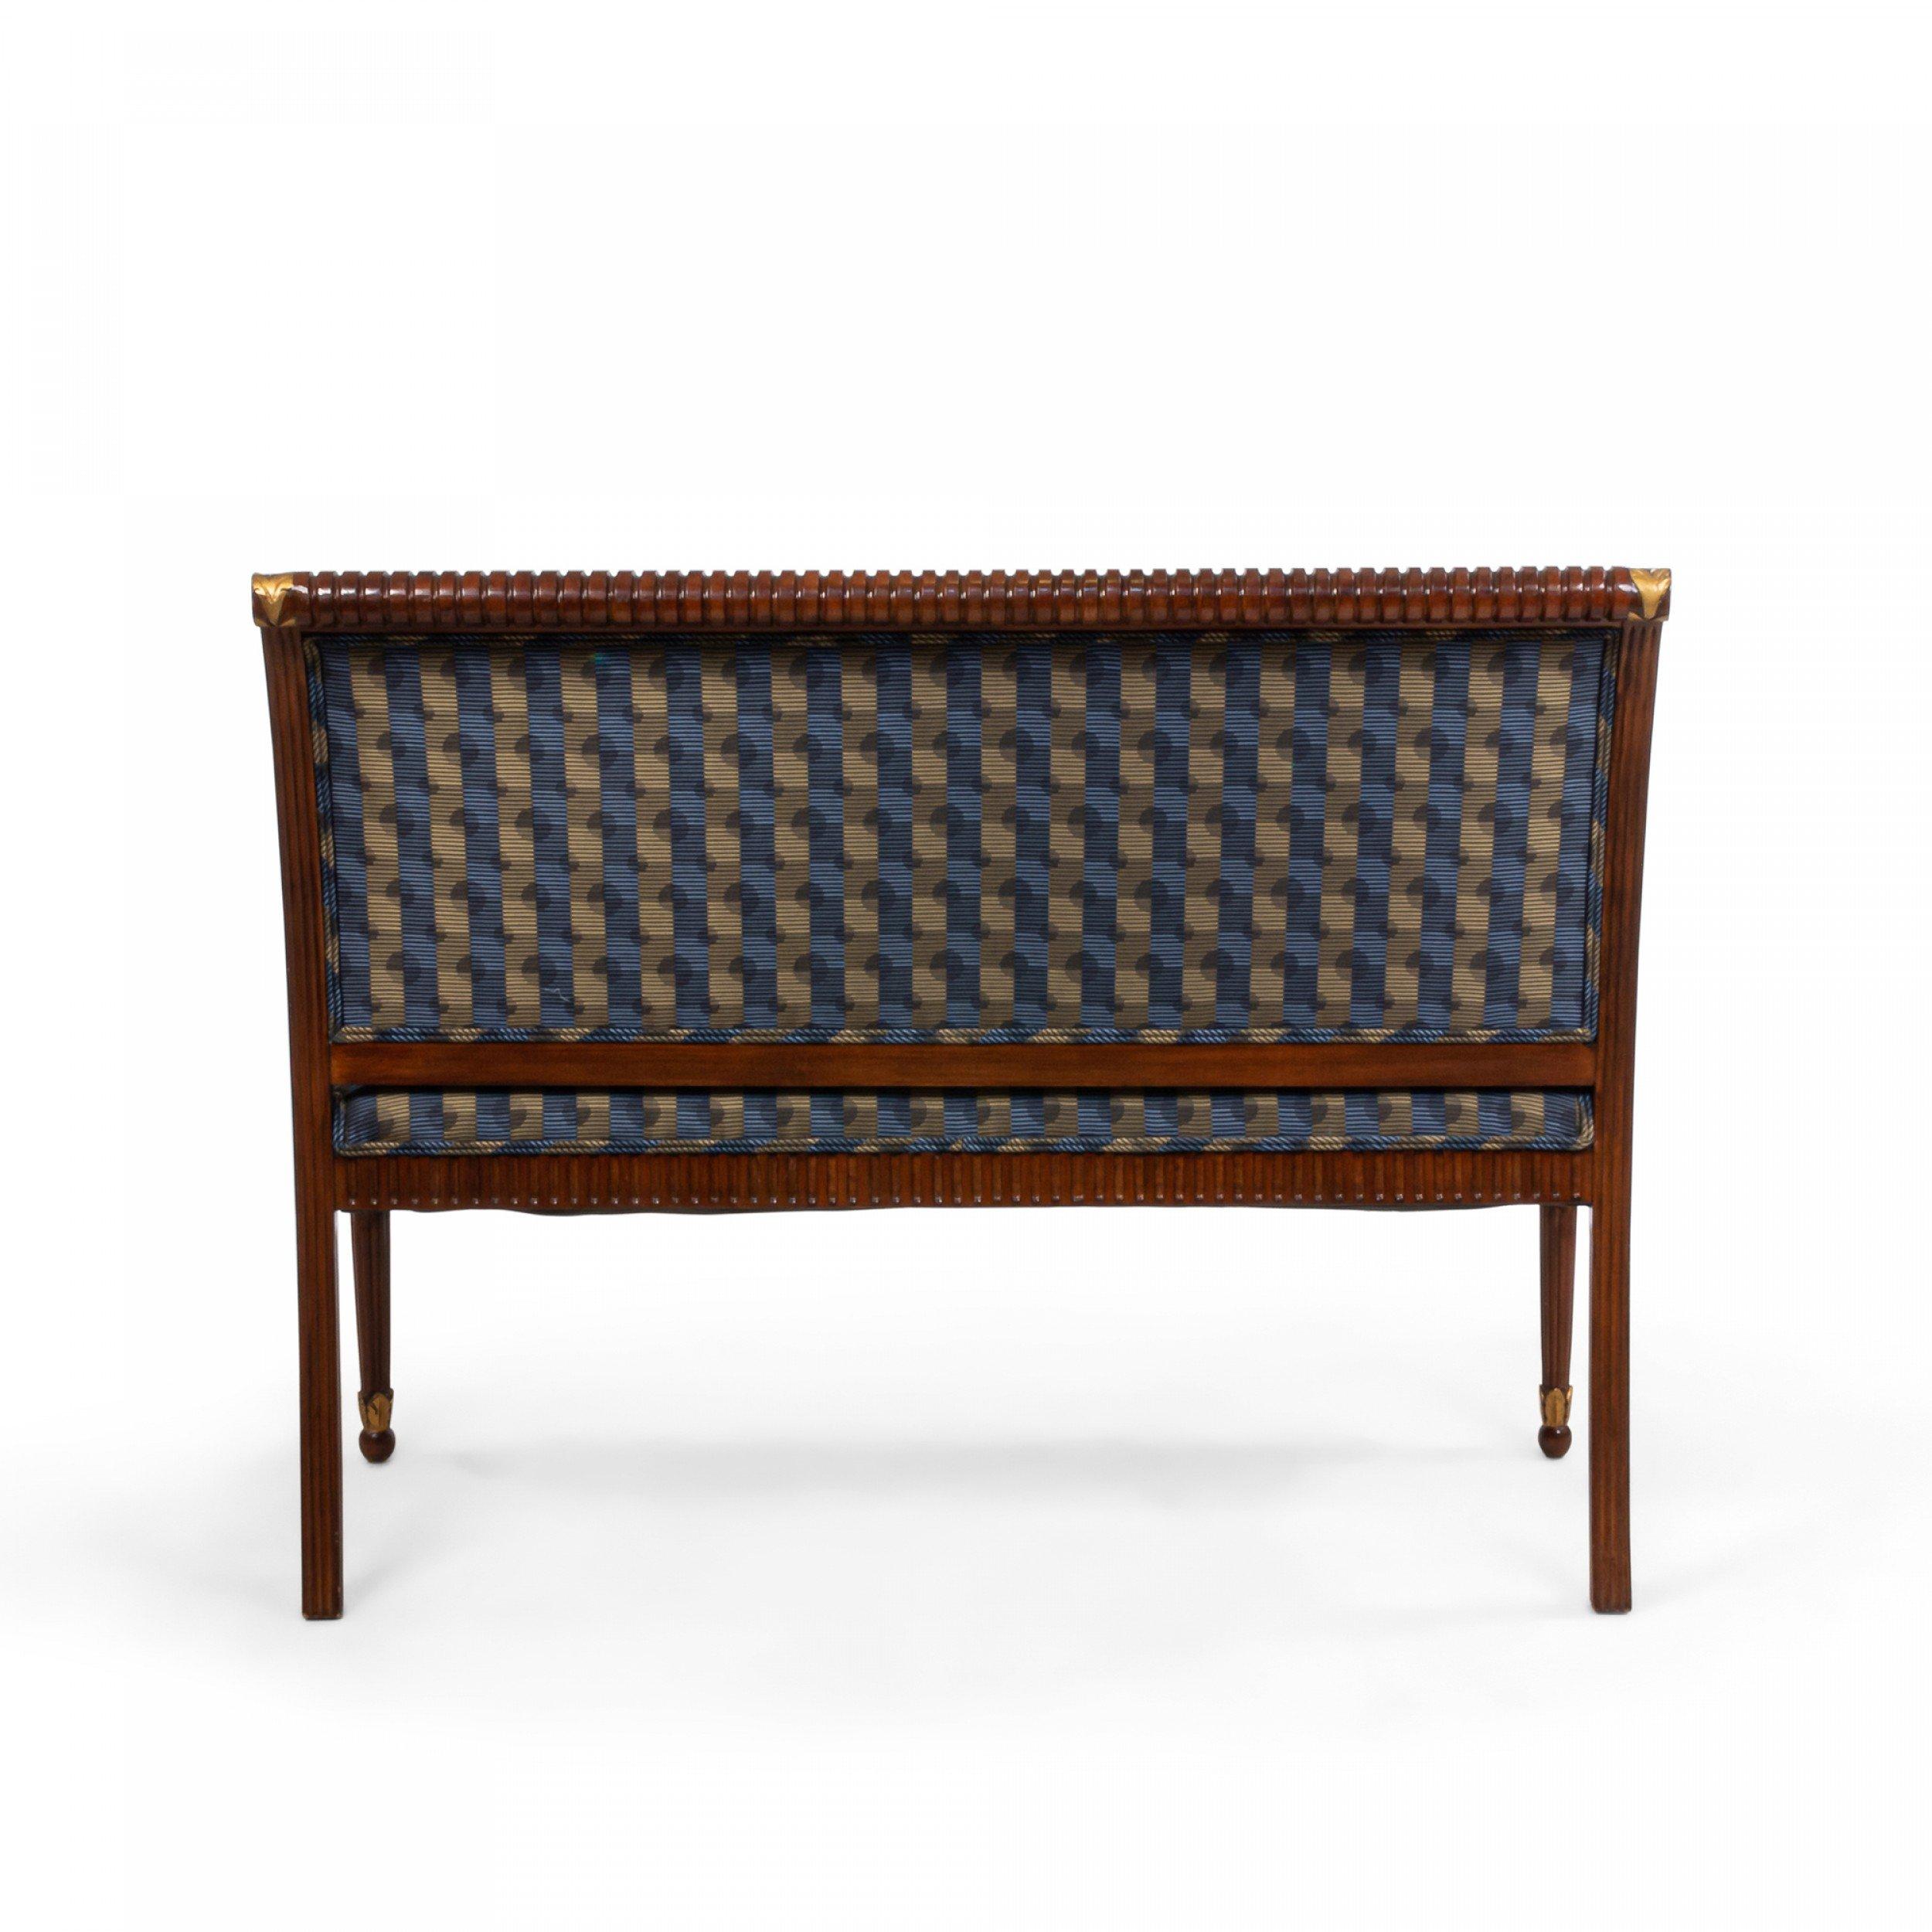 20th Century French Louis XVI Style Mahogany Settee with Blue Patterned Upholstery